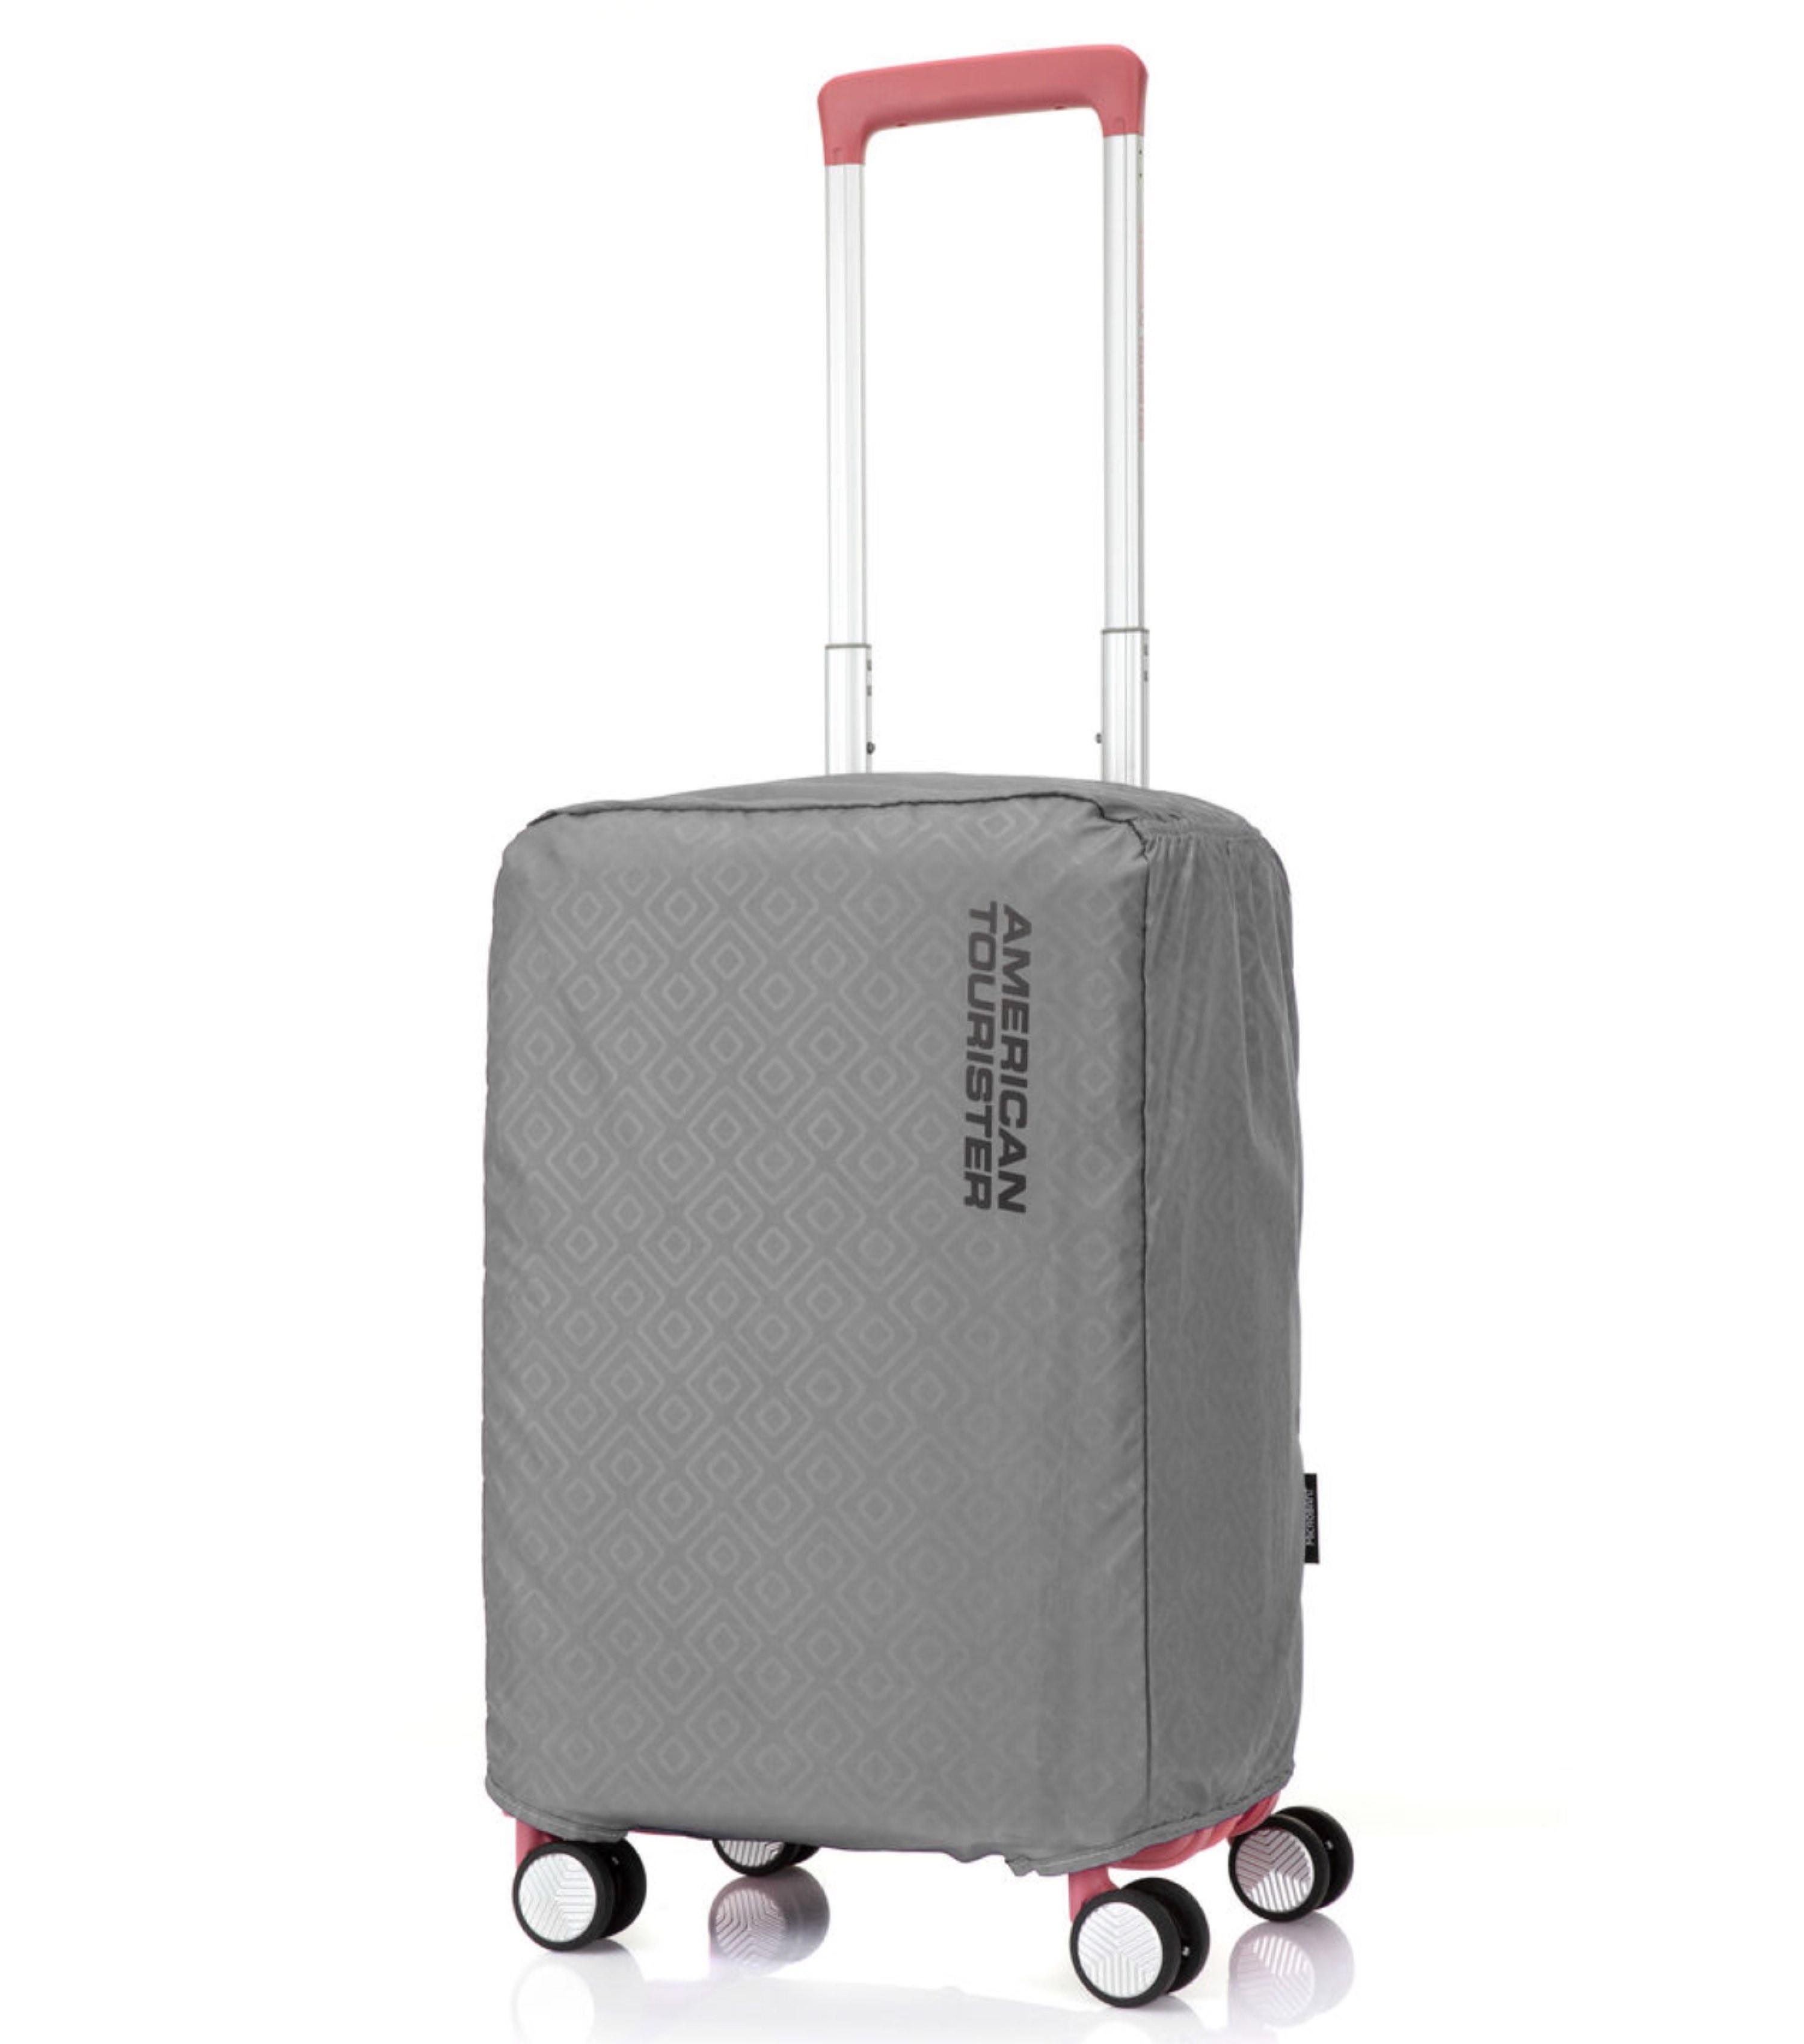 American Tourister Antimicrobial Luggage Cover - Small (Fits 50 - 55 cm  Cases) - Grey by American Tourister Luggage (138619-1408)